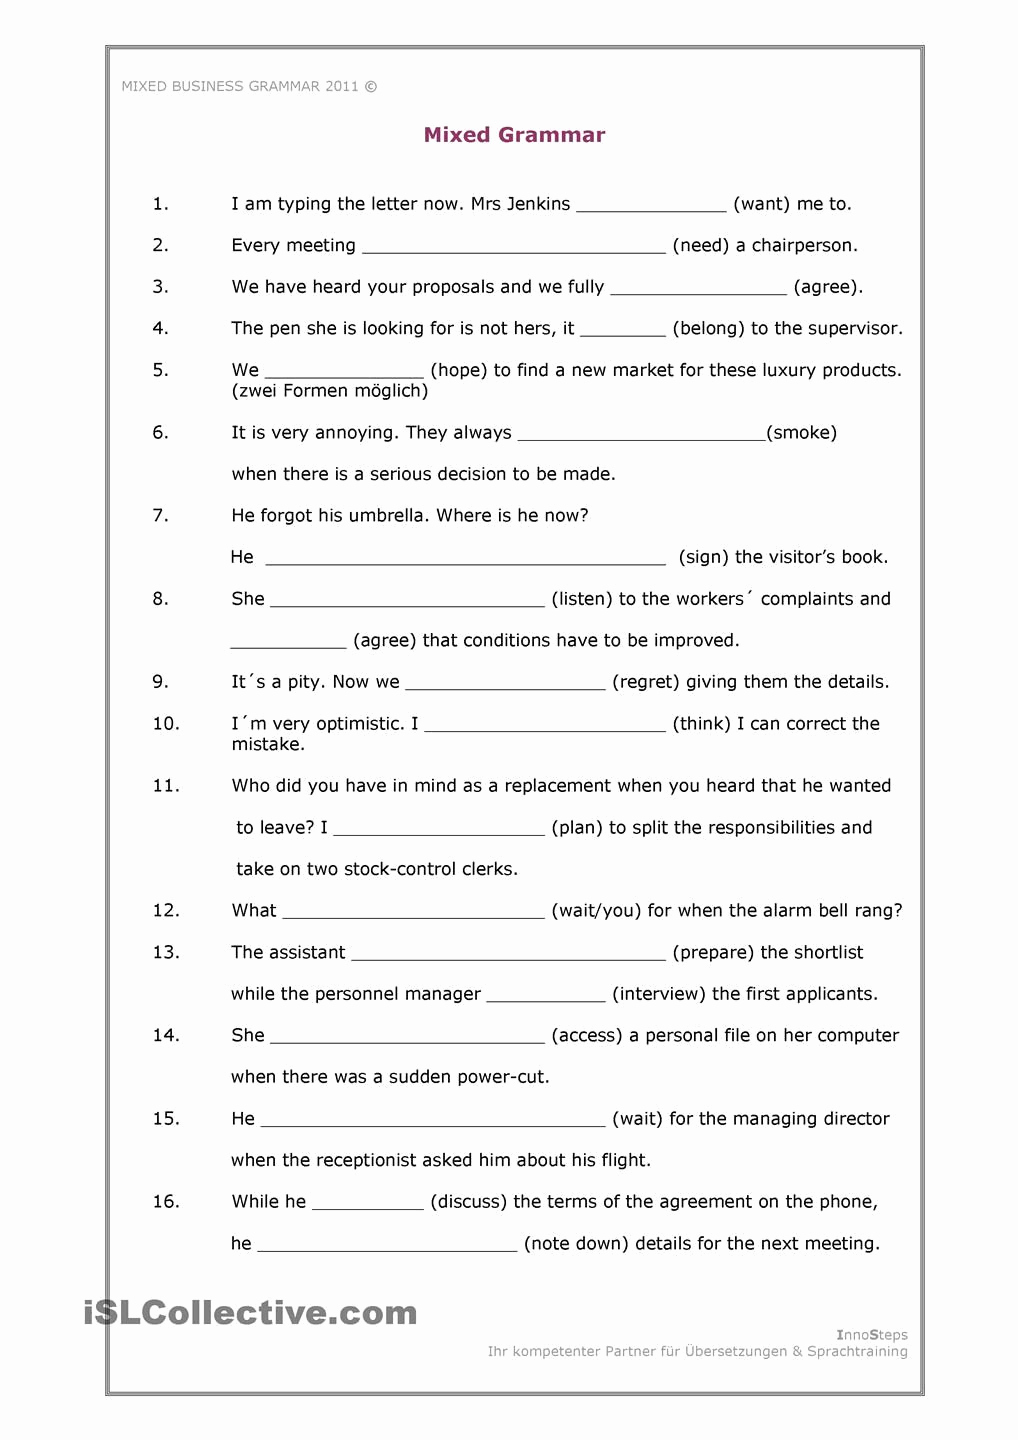 Verbs Worksheets for Middle School Lovely 20 Verbs Worksheets for Middle School